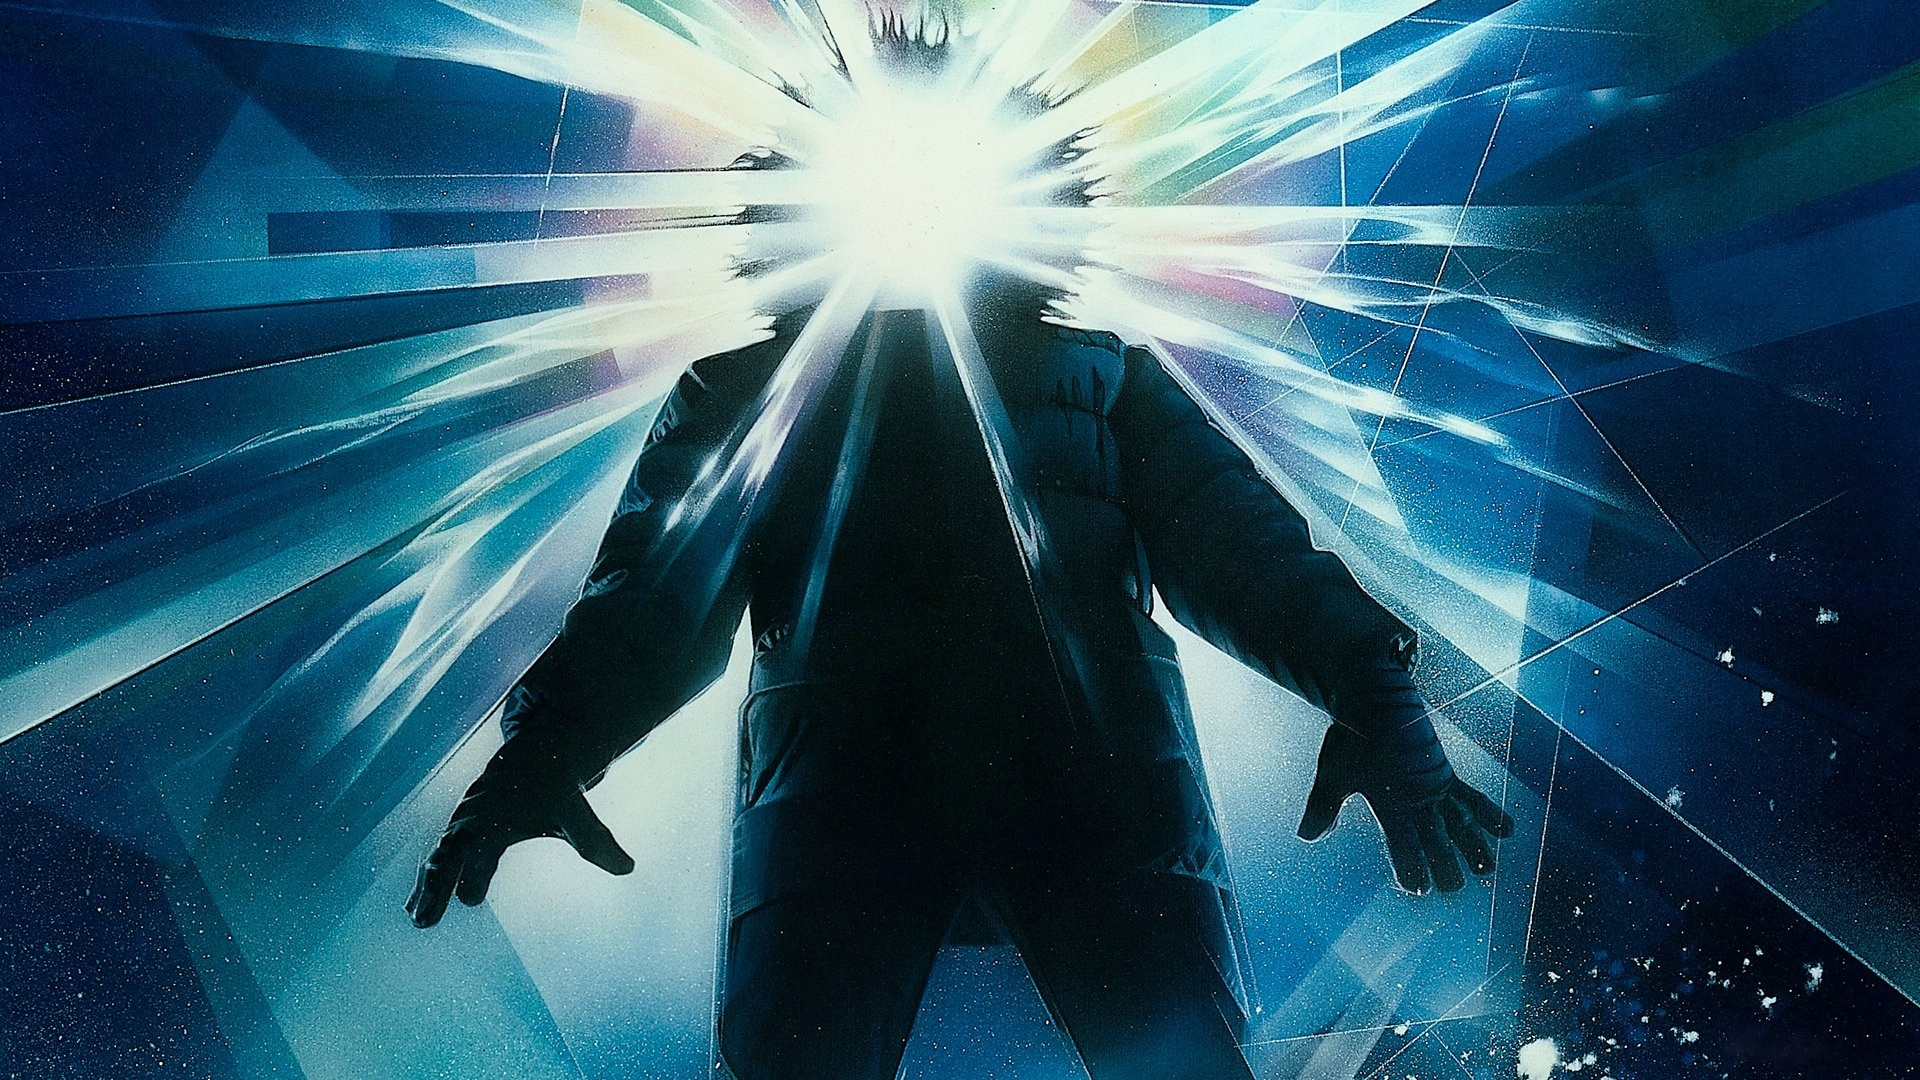 General 1920x1080 The Thing movie poster movies Film posters horror aliens abstract lines jacket gloves cyan blue shapes science fiction